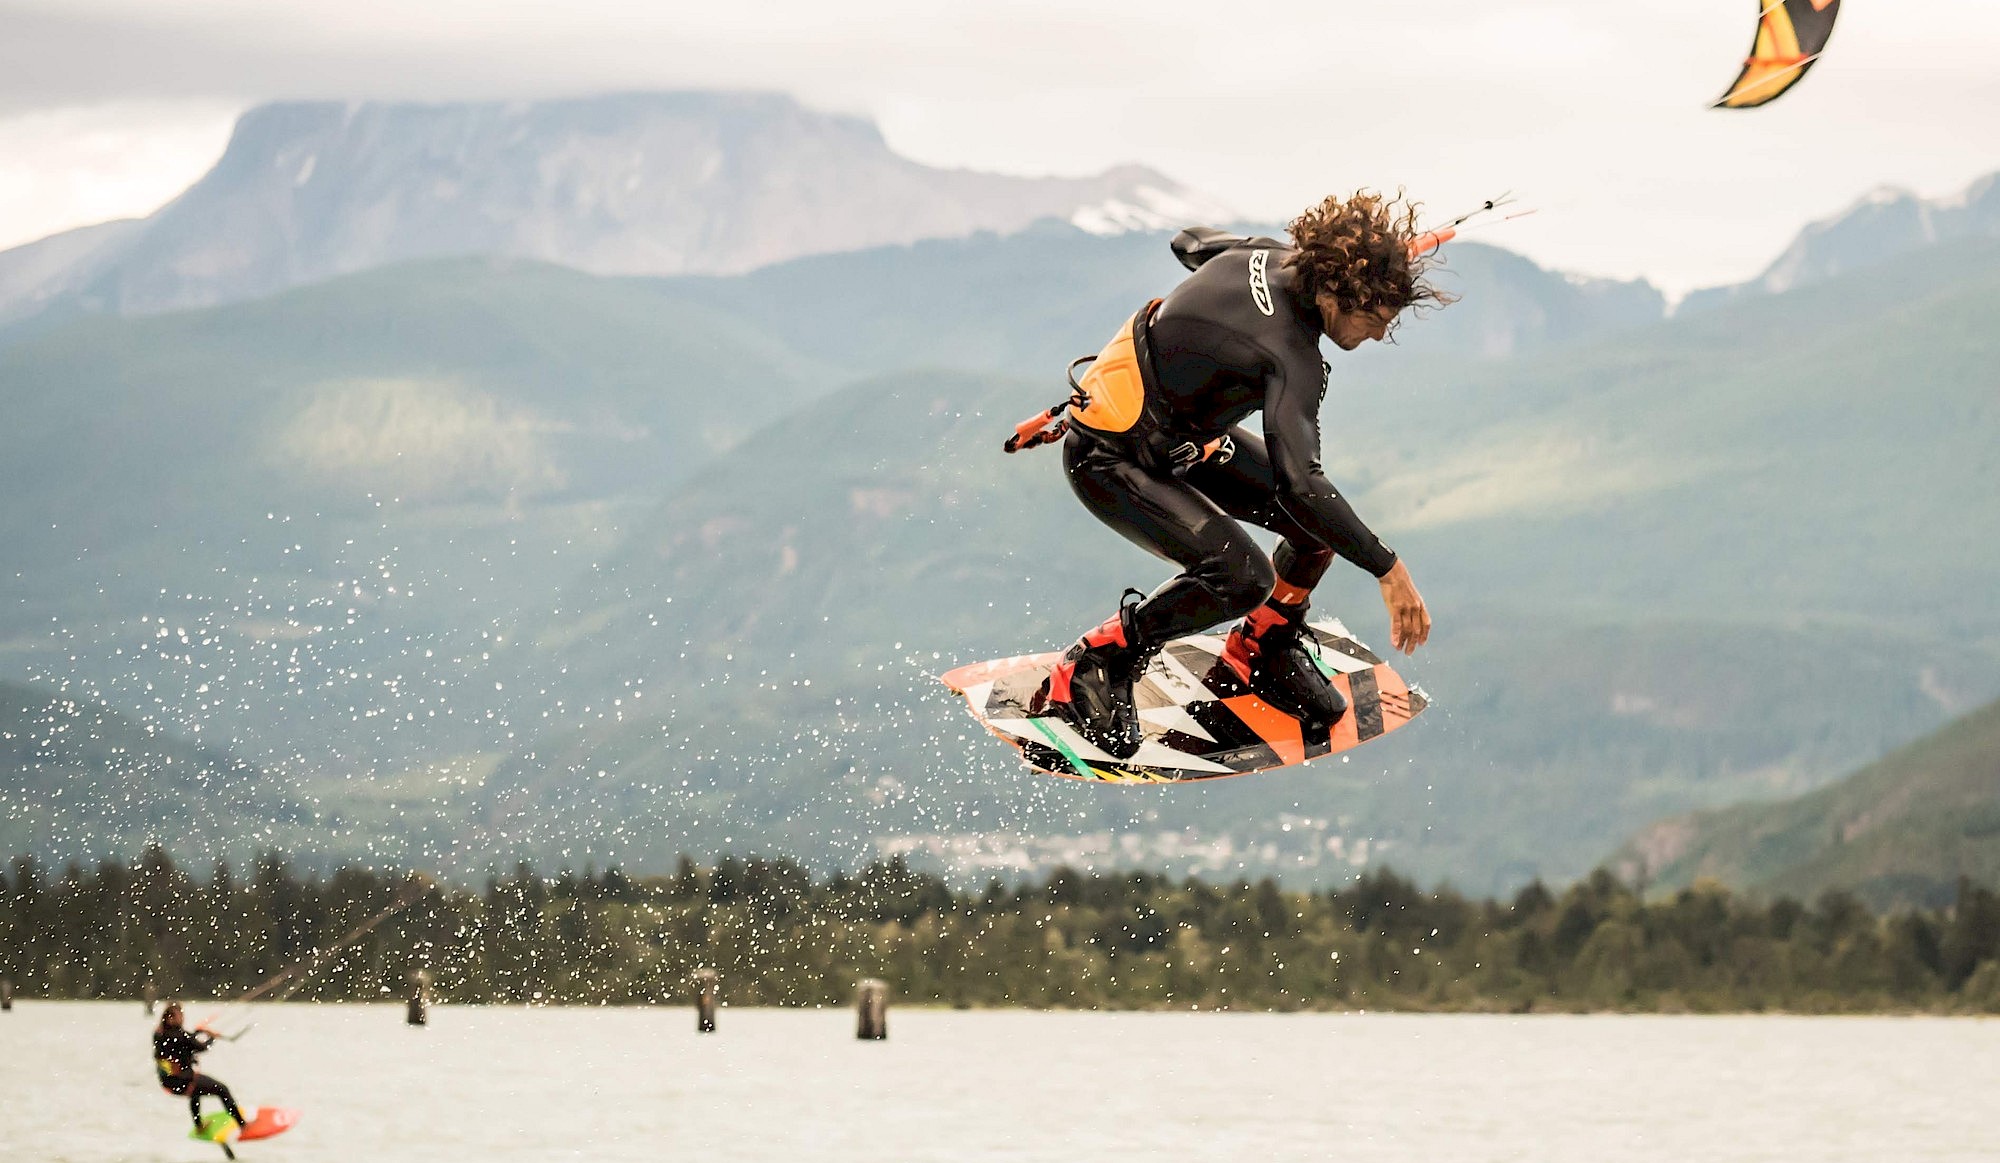 Kiteboarder getting air with Garibaldi in the background